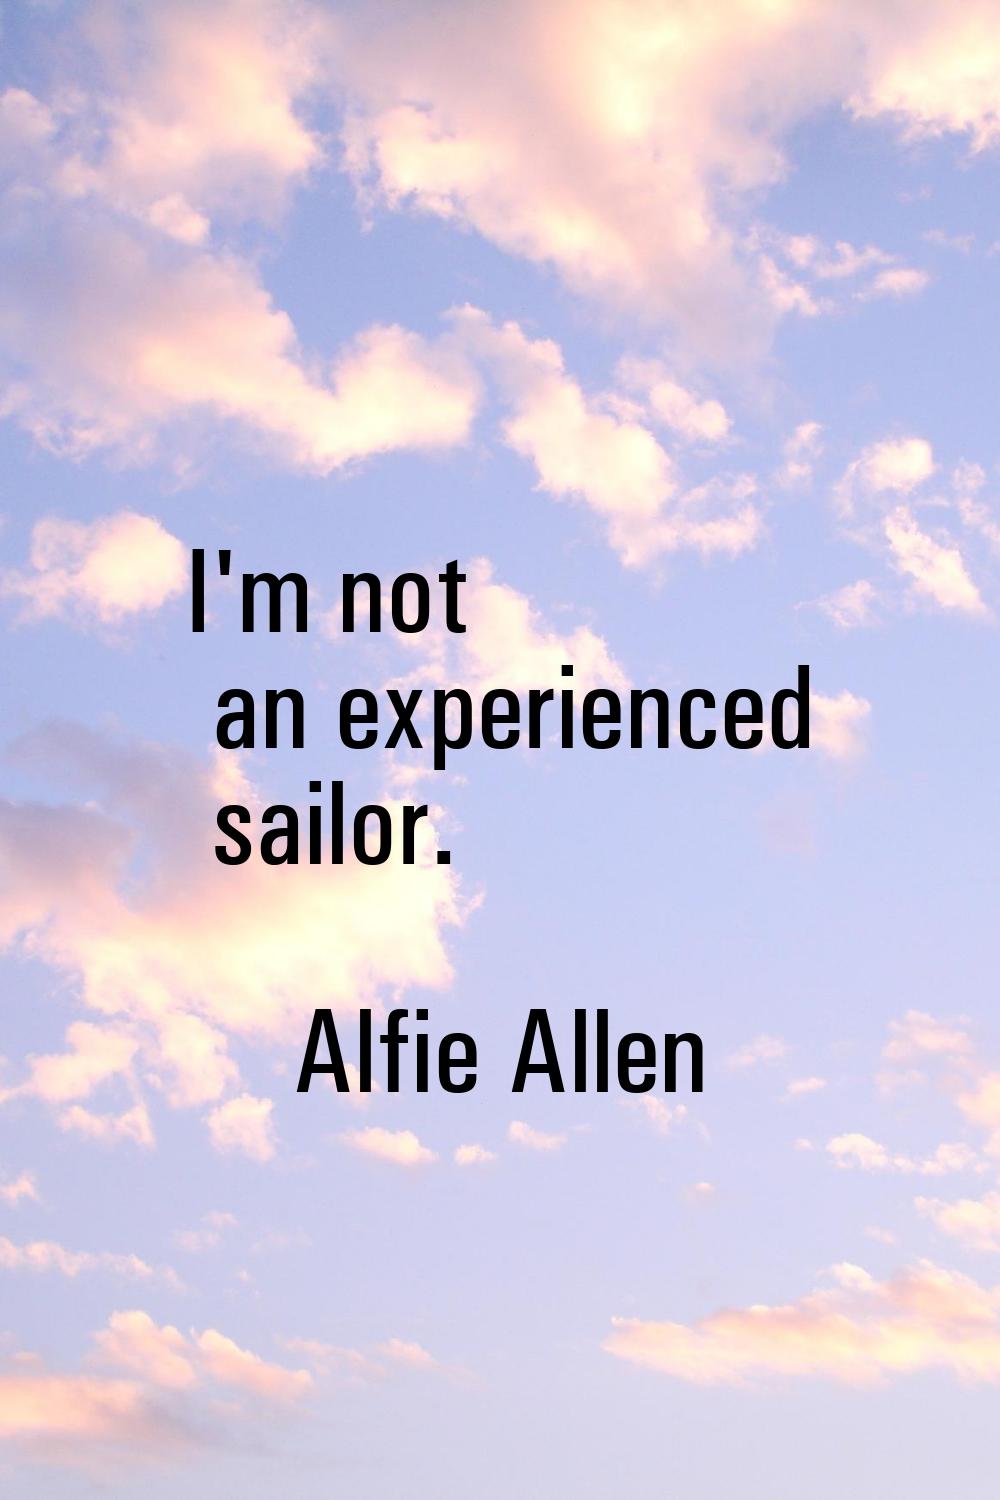 I'm not an experienced sailor.